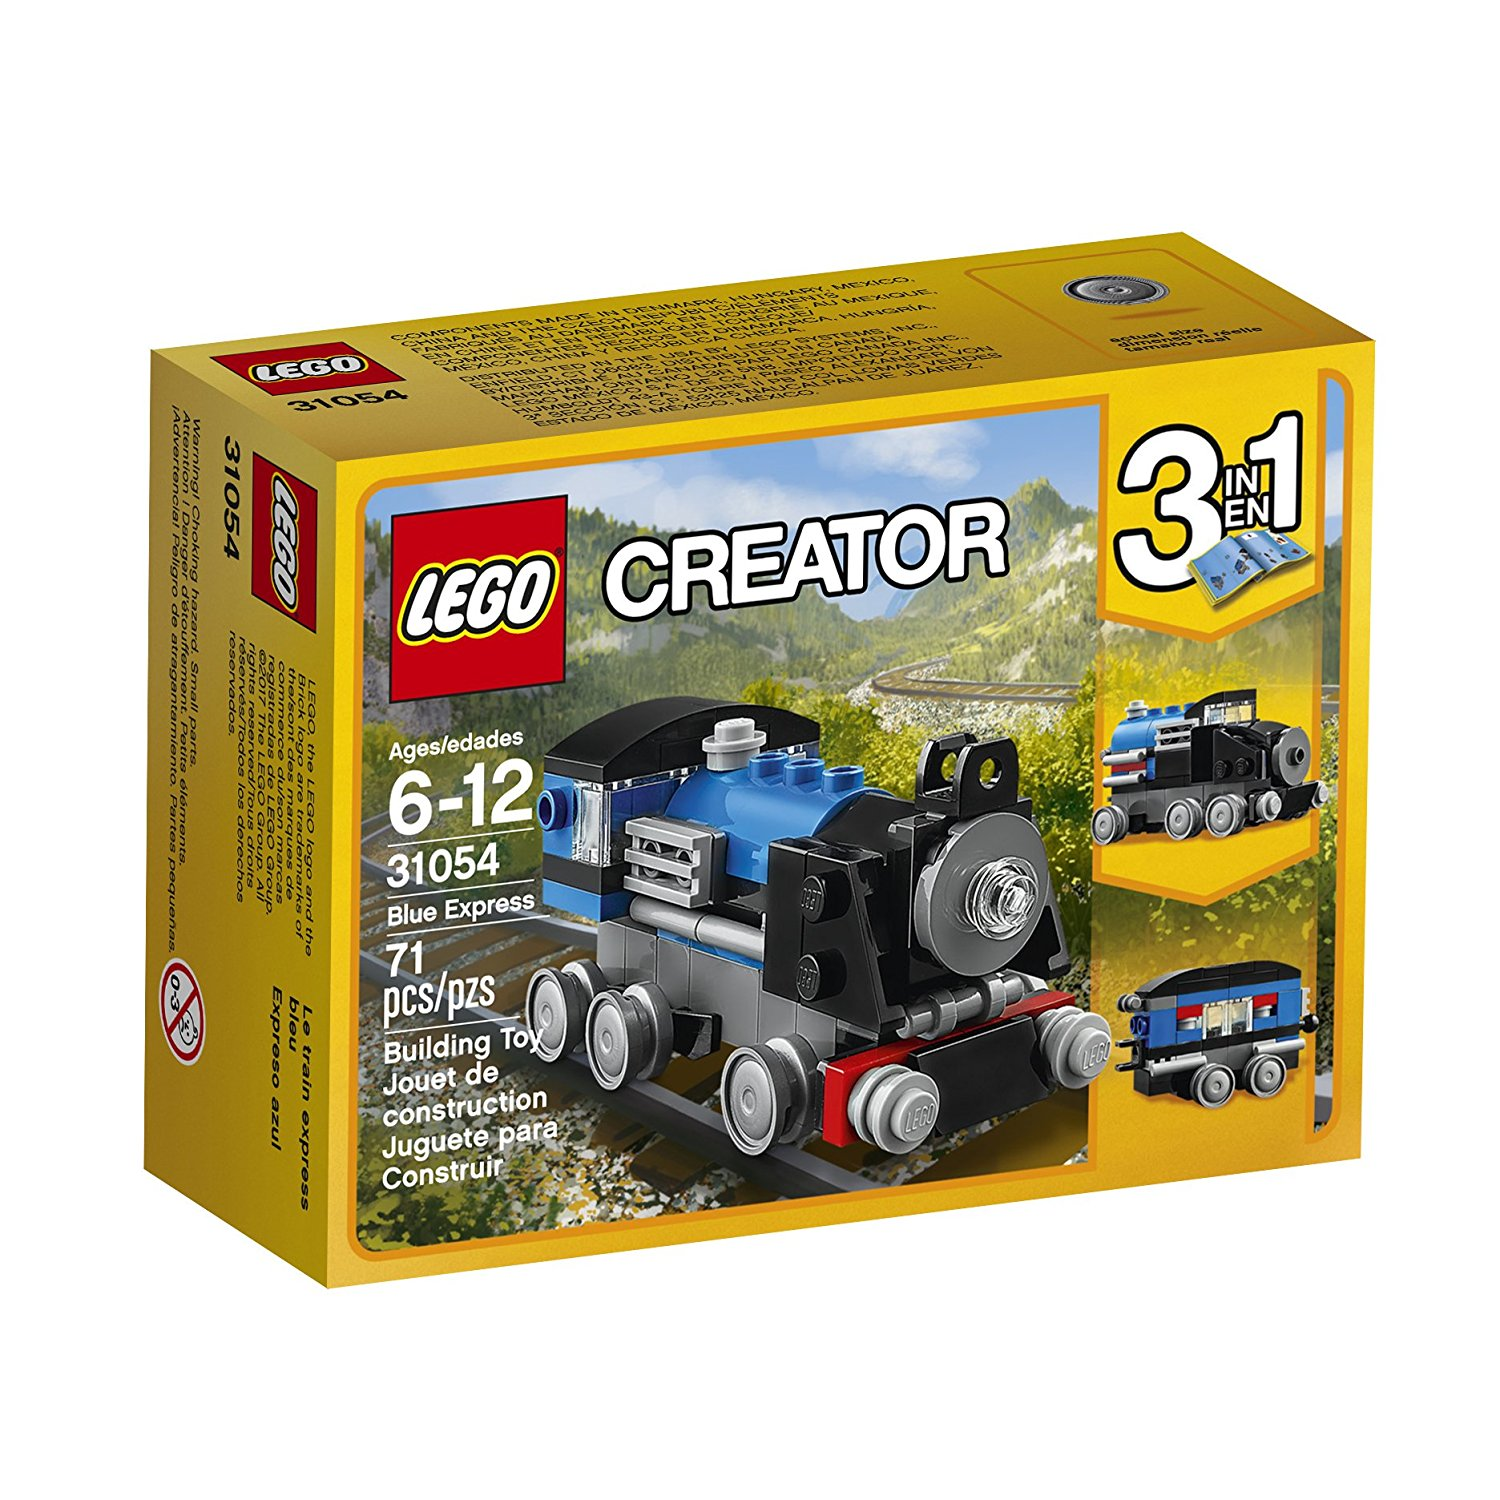 LEGO Creator Blue Express Building Kit Only $4.93!